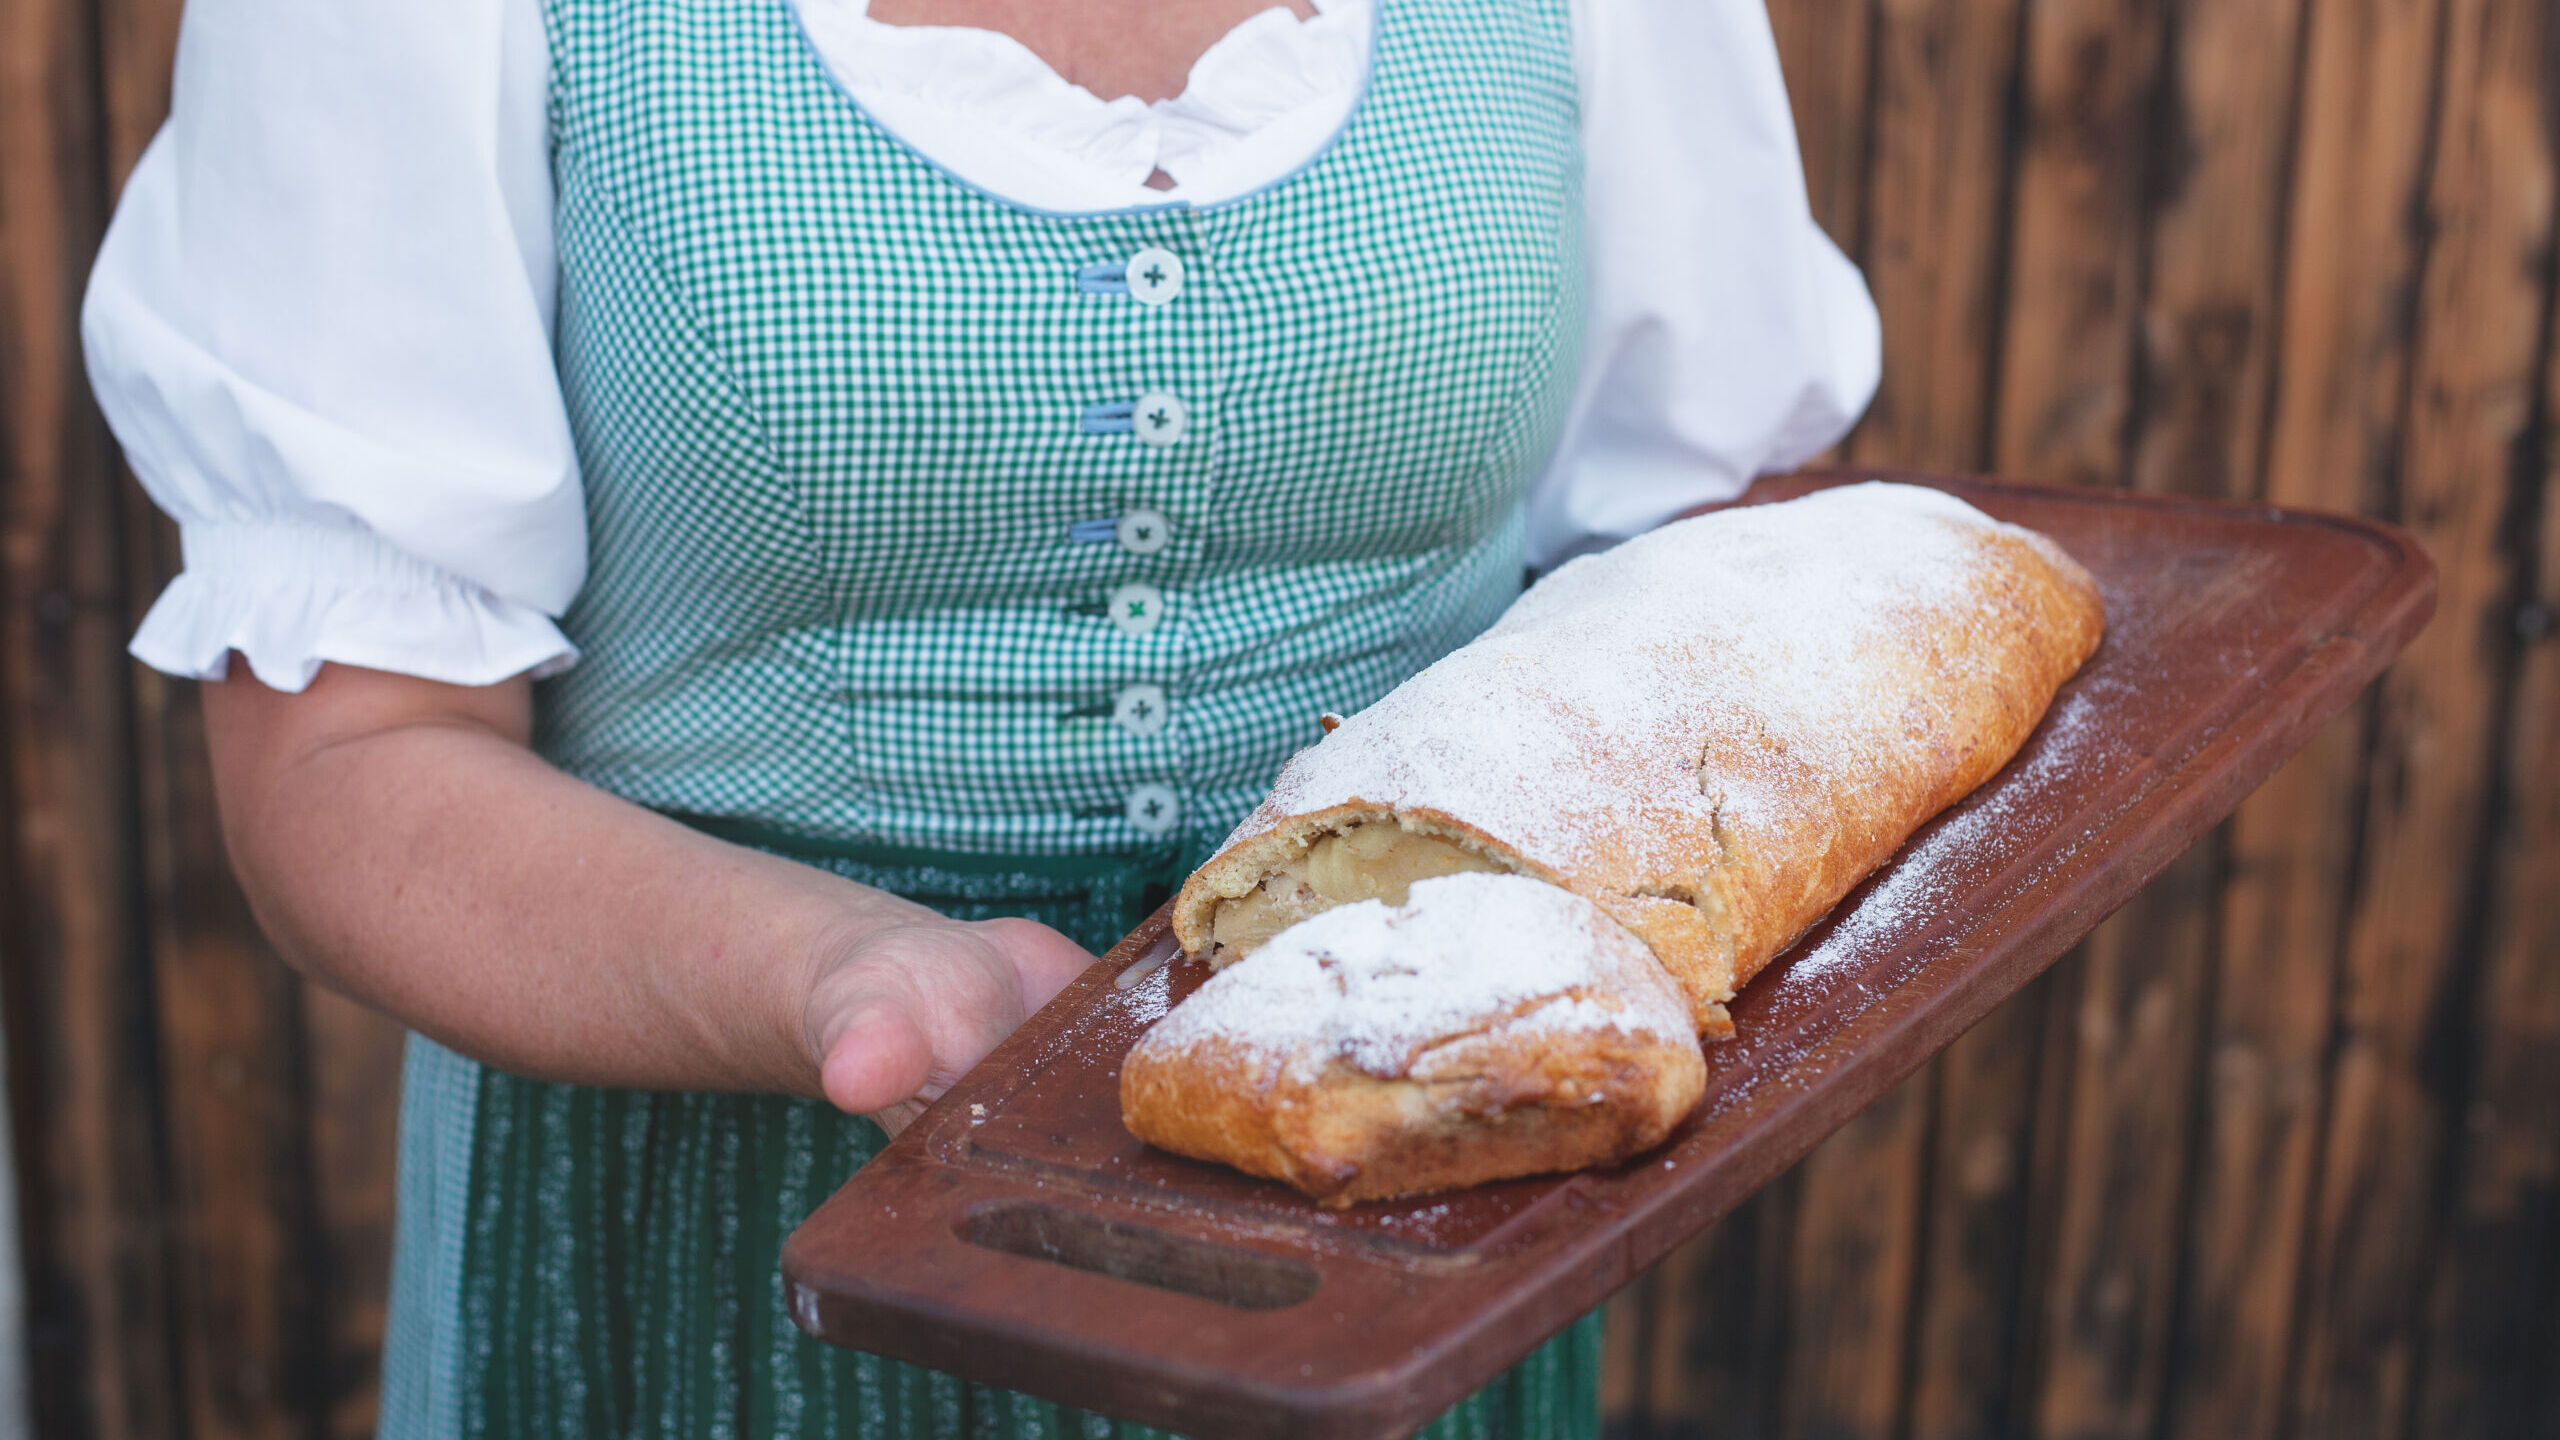 Delicious homemade strudel, a traditional Alpine pastry